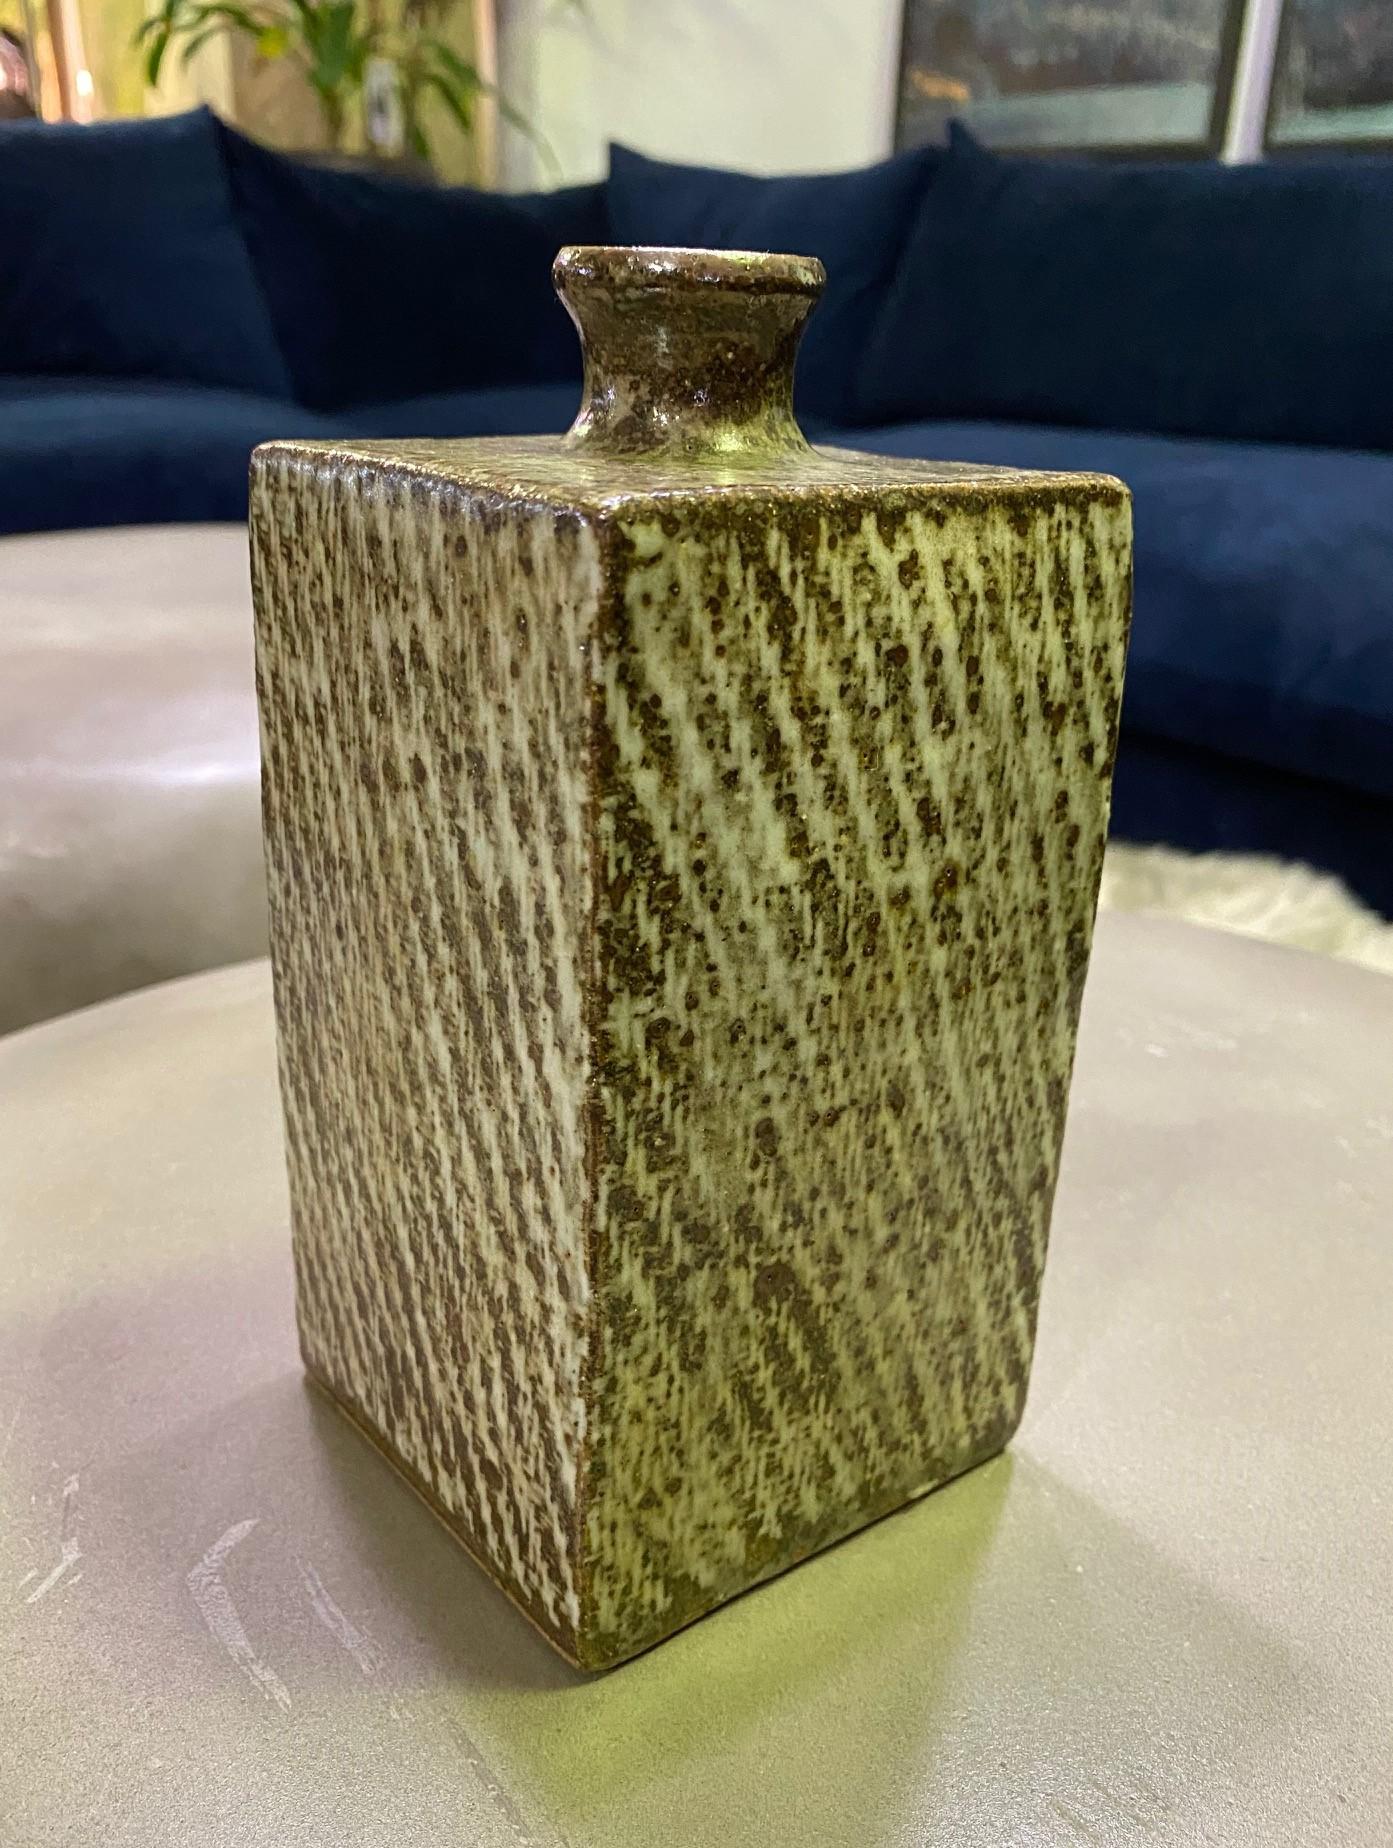 A wonderfully decorated and executed coveted square Mingei bottle vase by Japanese National Treasure pottery master Tatsuzo Shimaoka. This work exhibits his signature Jomon Zogan rope inlay, cord slip pattern technique, and displays an early version